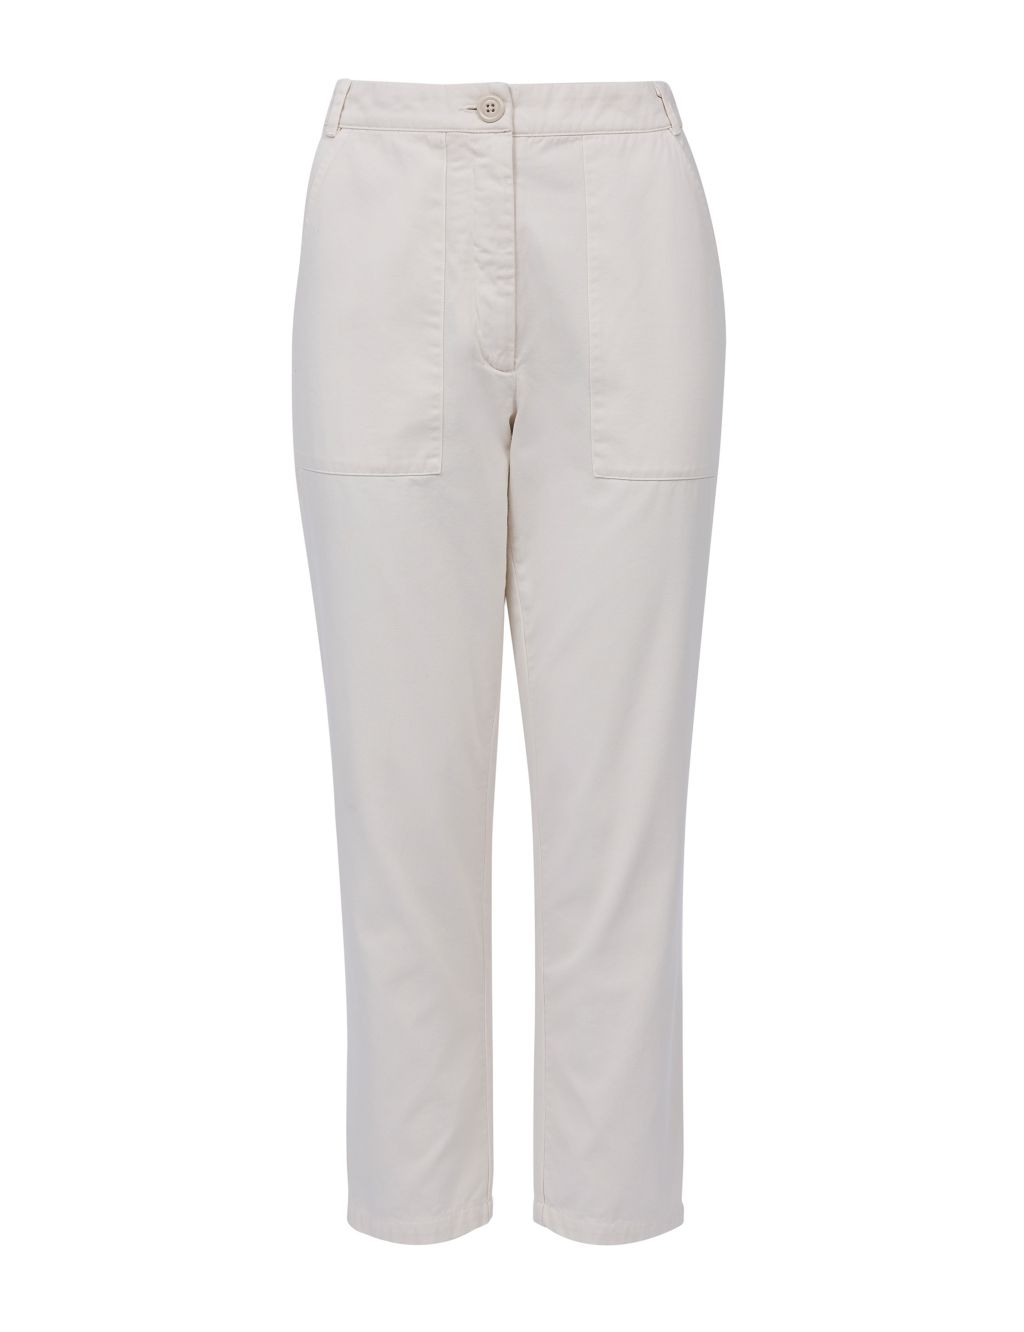 Pure Cotton Slim Fit Cropped Trousers image 2